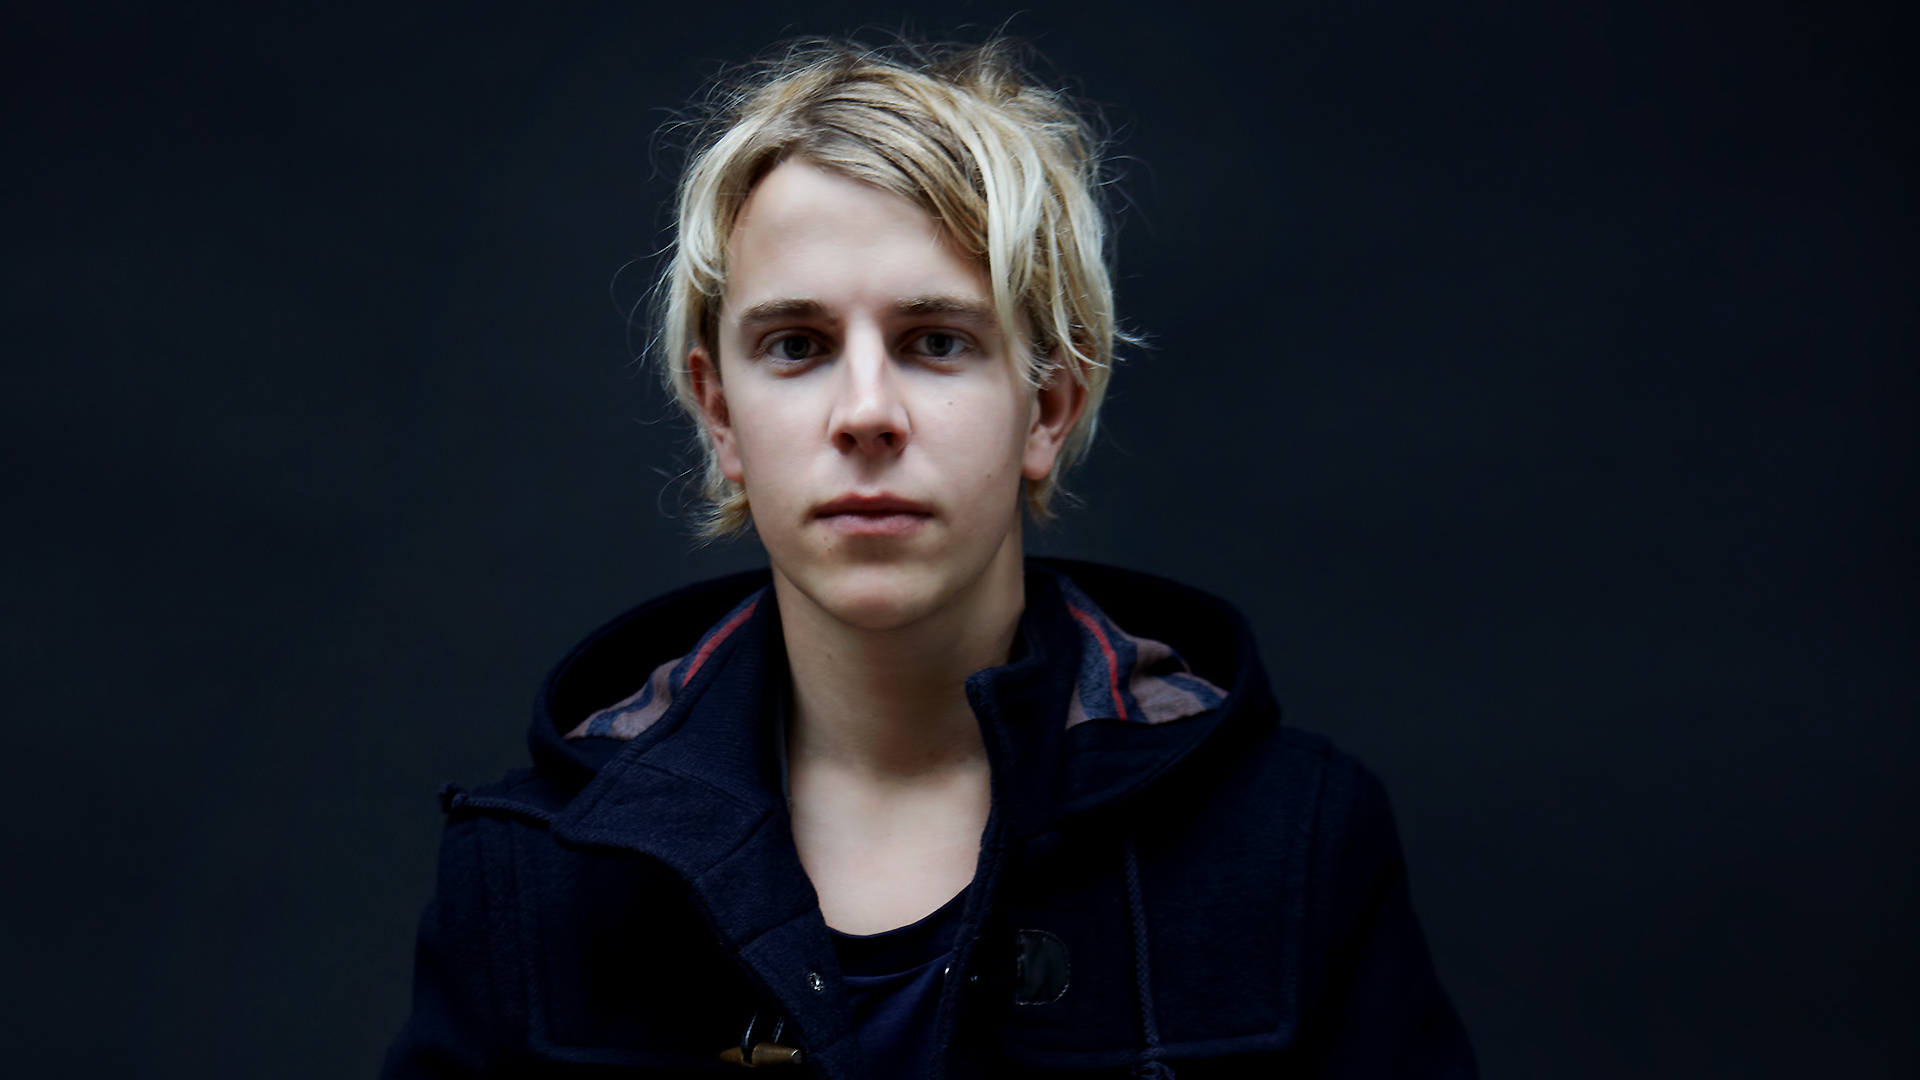 Tom Odell's music, Emotional connections, Fan-made artwork, Musical expression, 1920x1080 Full HD Desktop